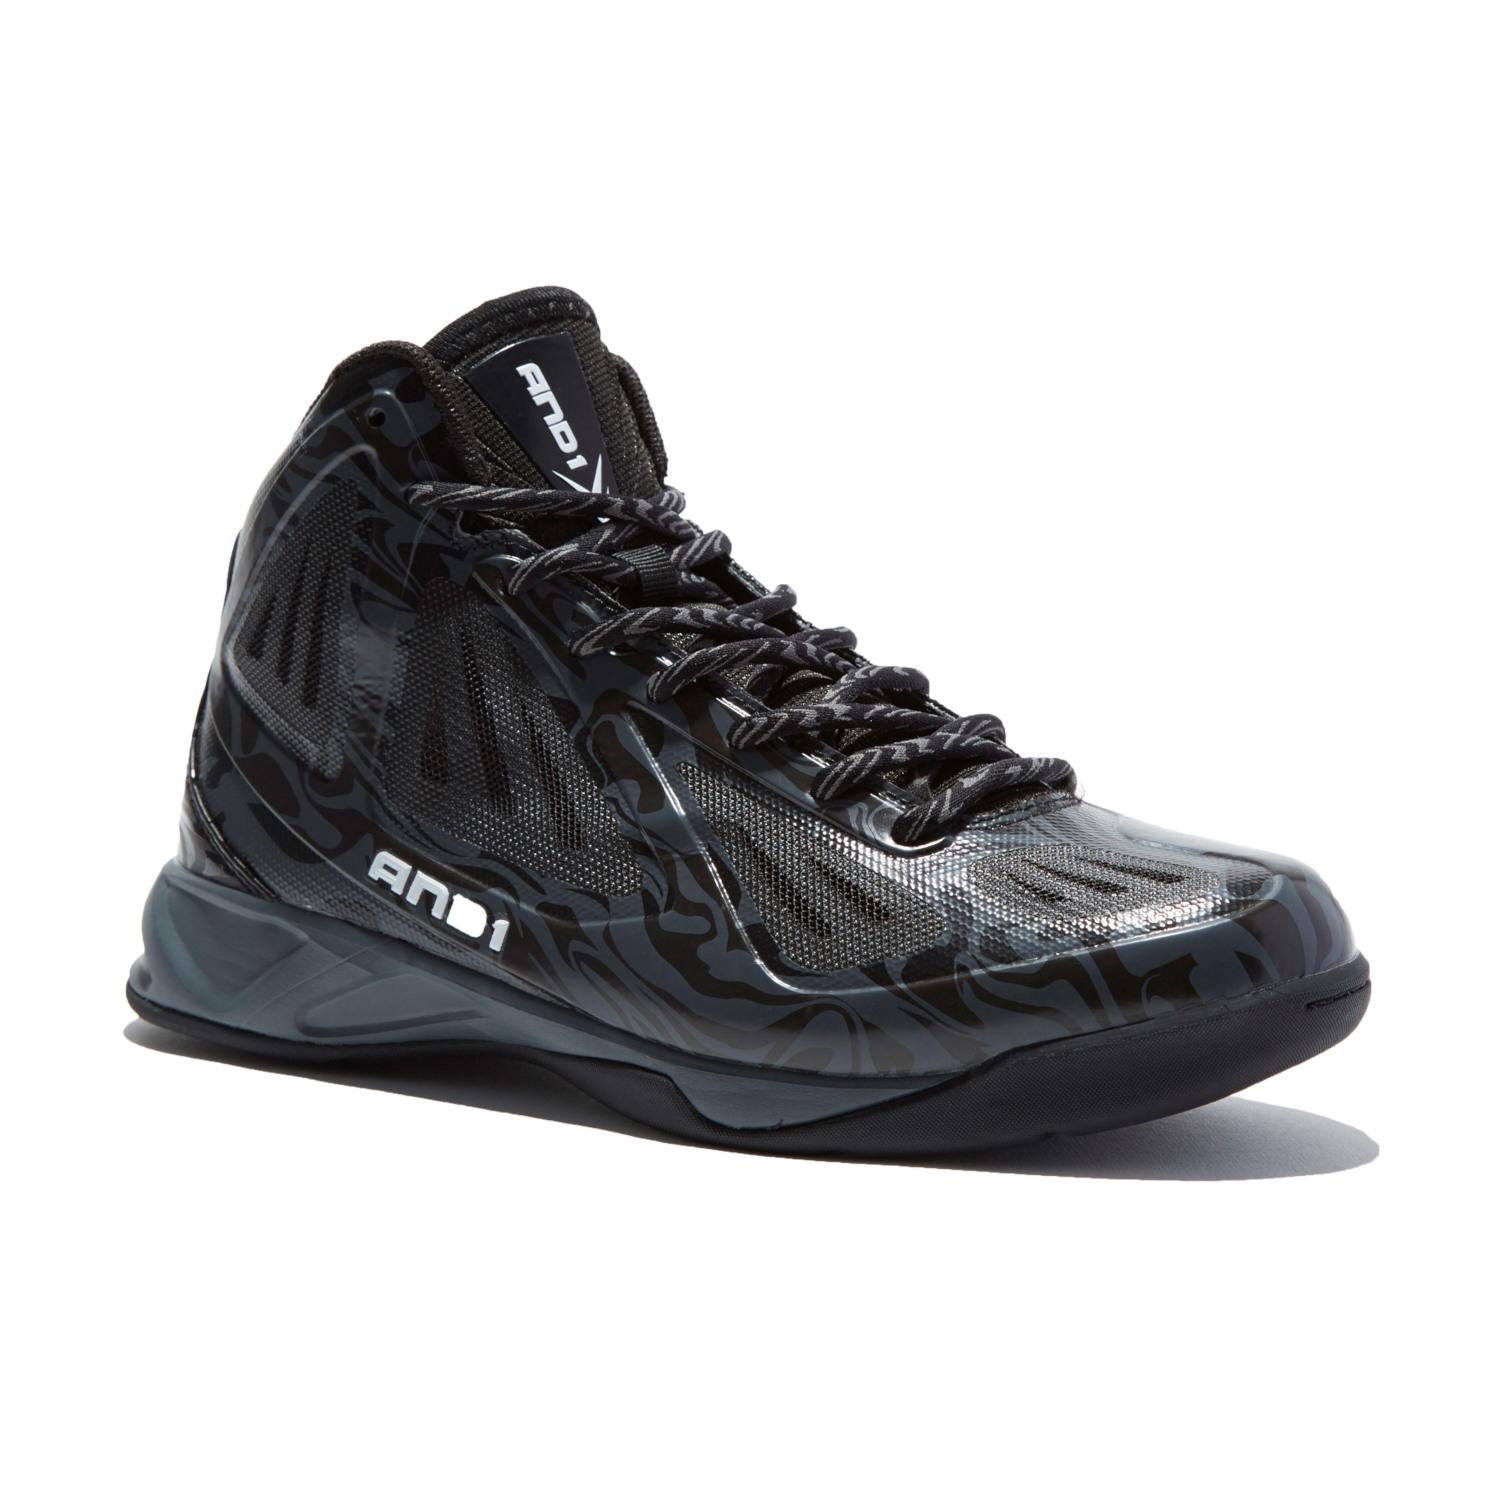 AND 1 Men's Xcelerate Black/Gray Basketball Shoe